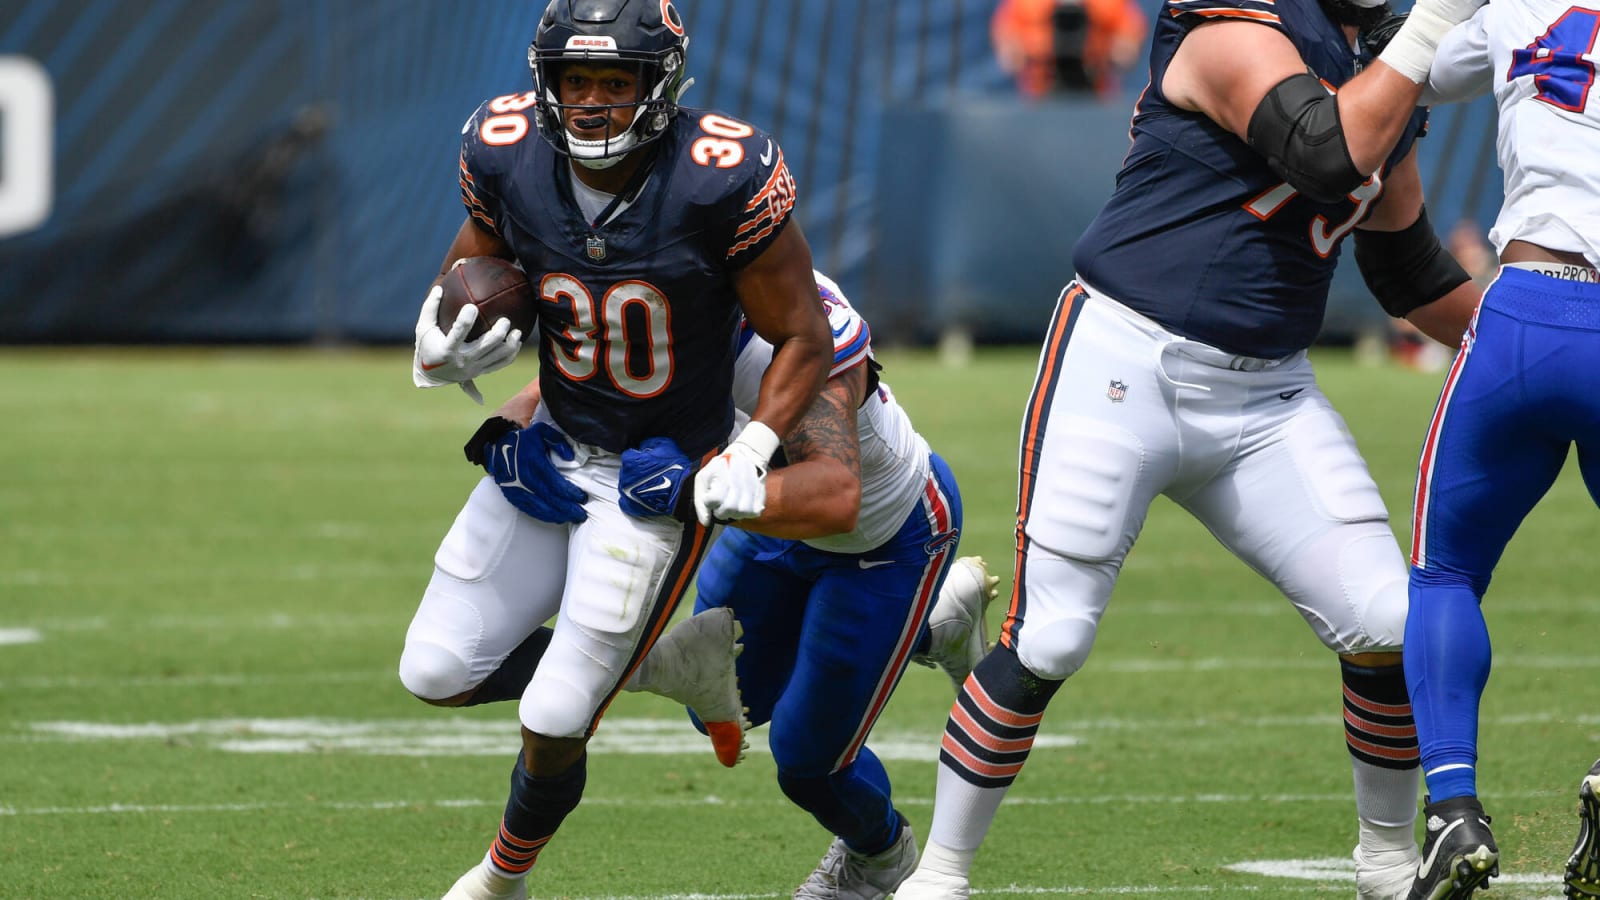 2023 Rookie Roschon Johnson could be a gem for the Chicago Bears